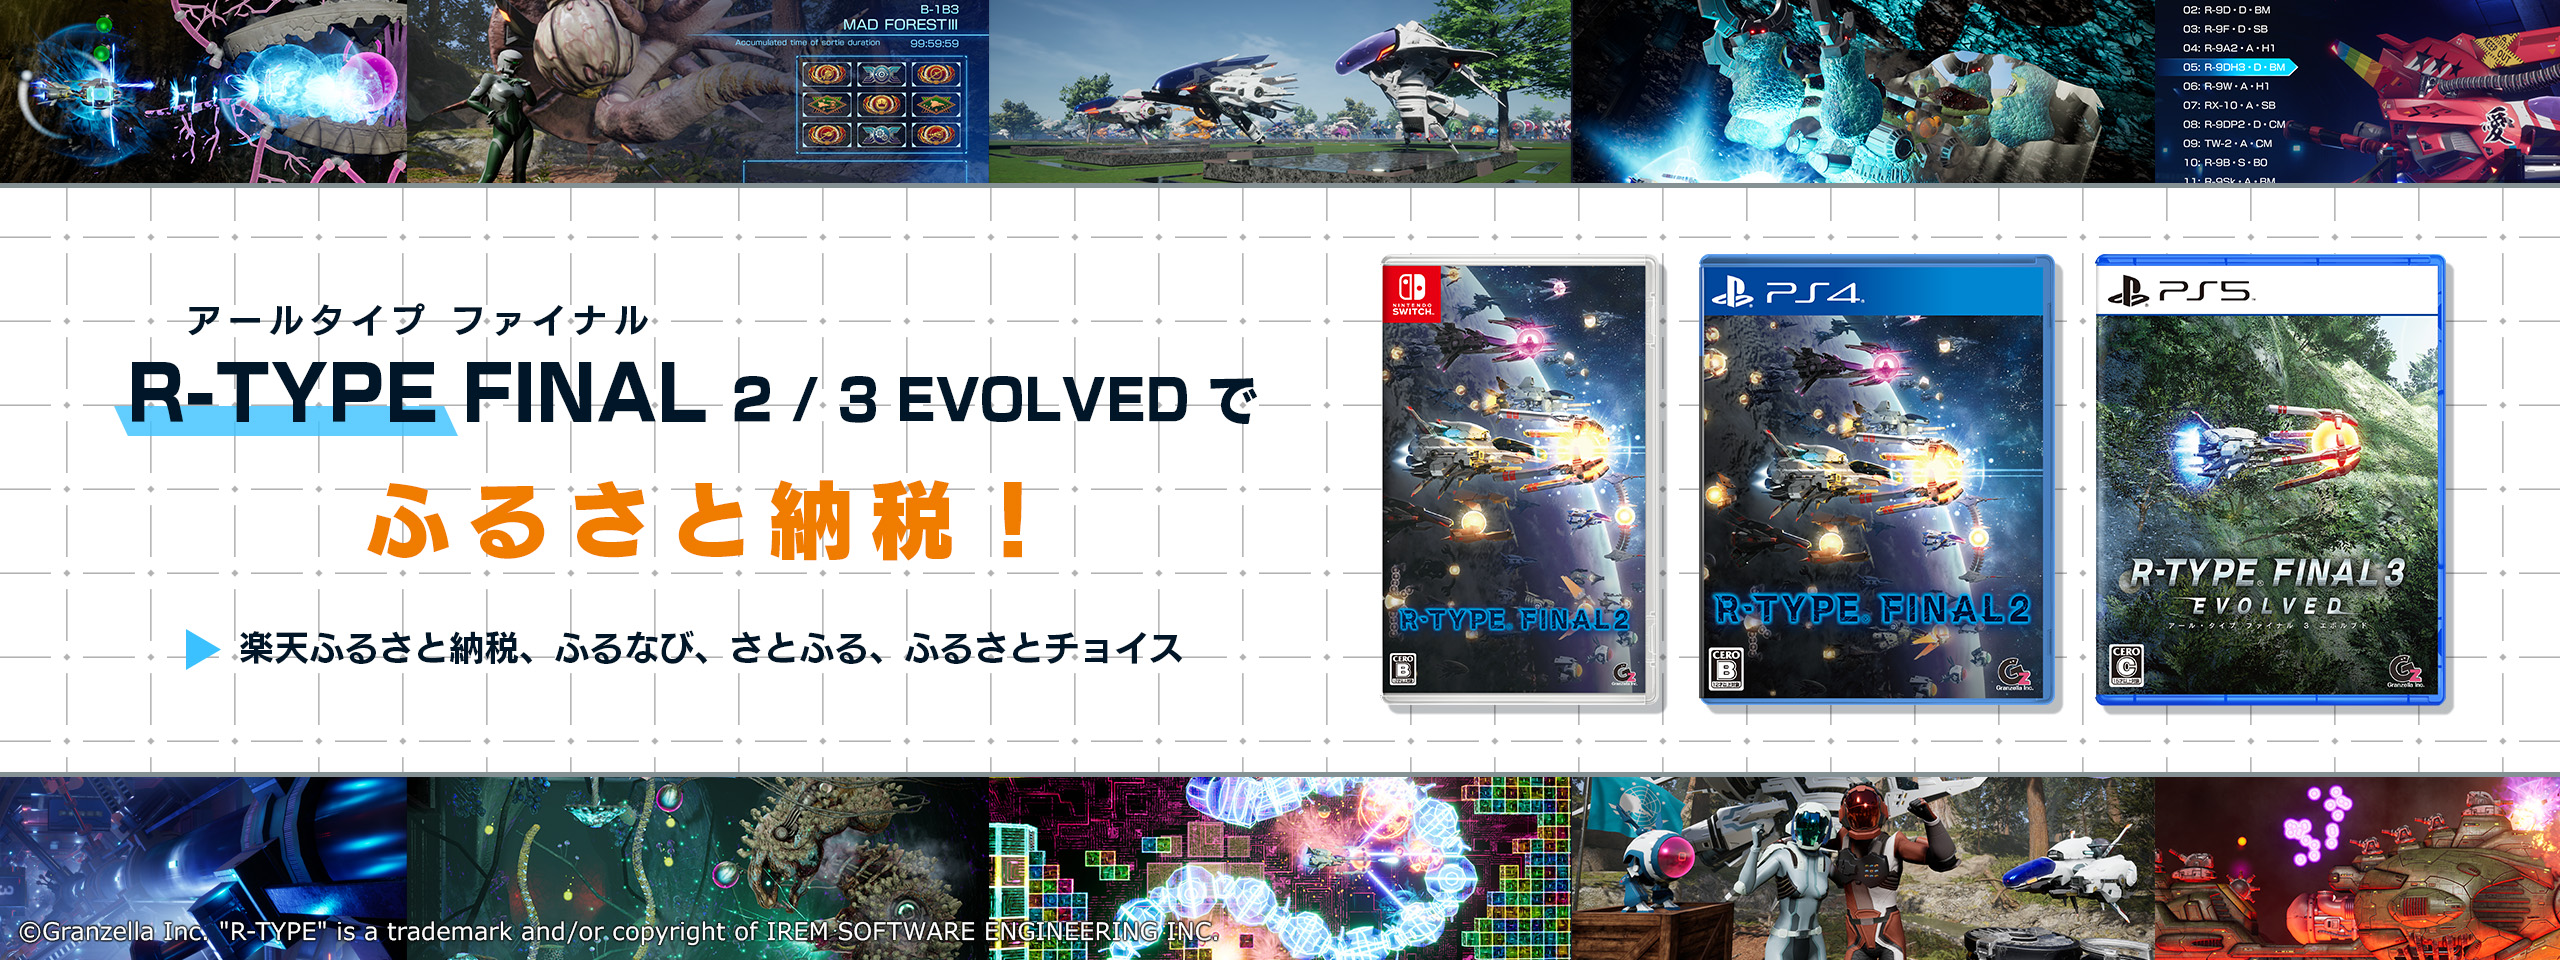 R-TYPE FINAL 2/3 EVOLVEDでふるさと納税！